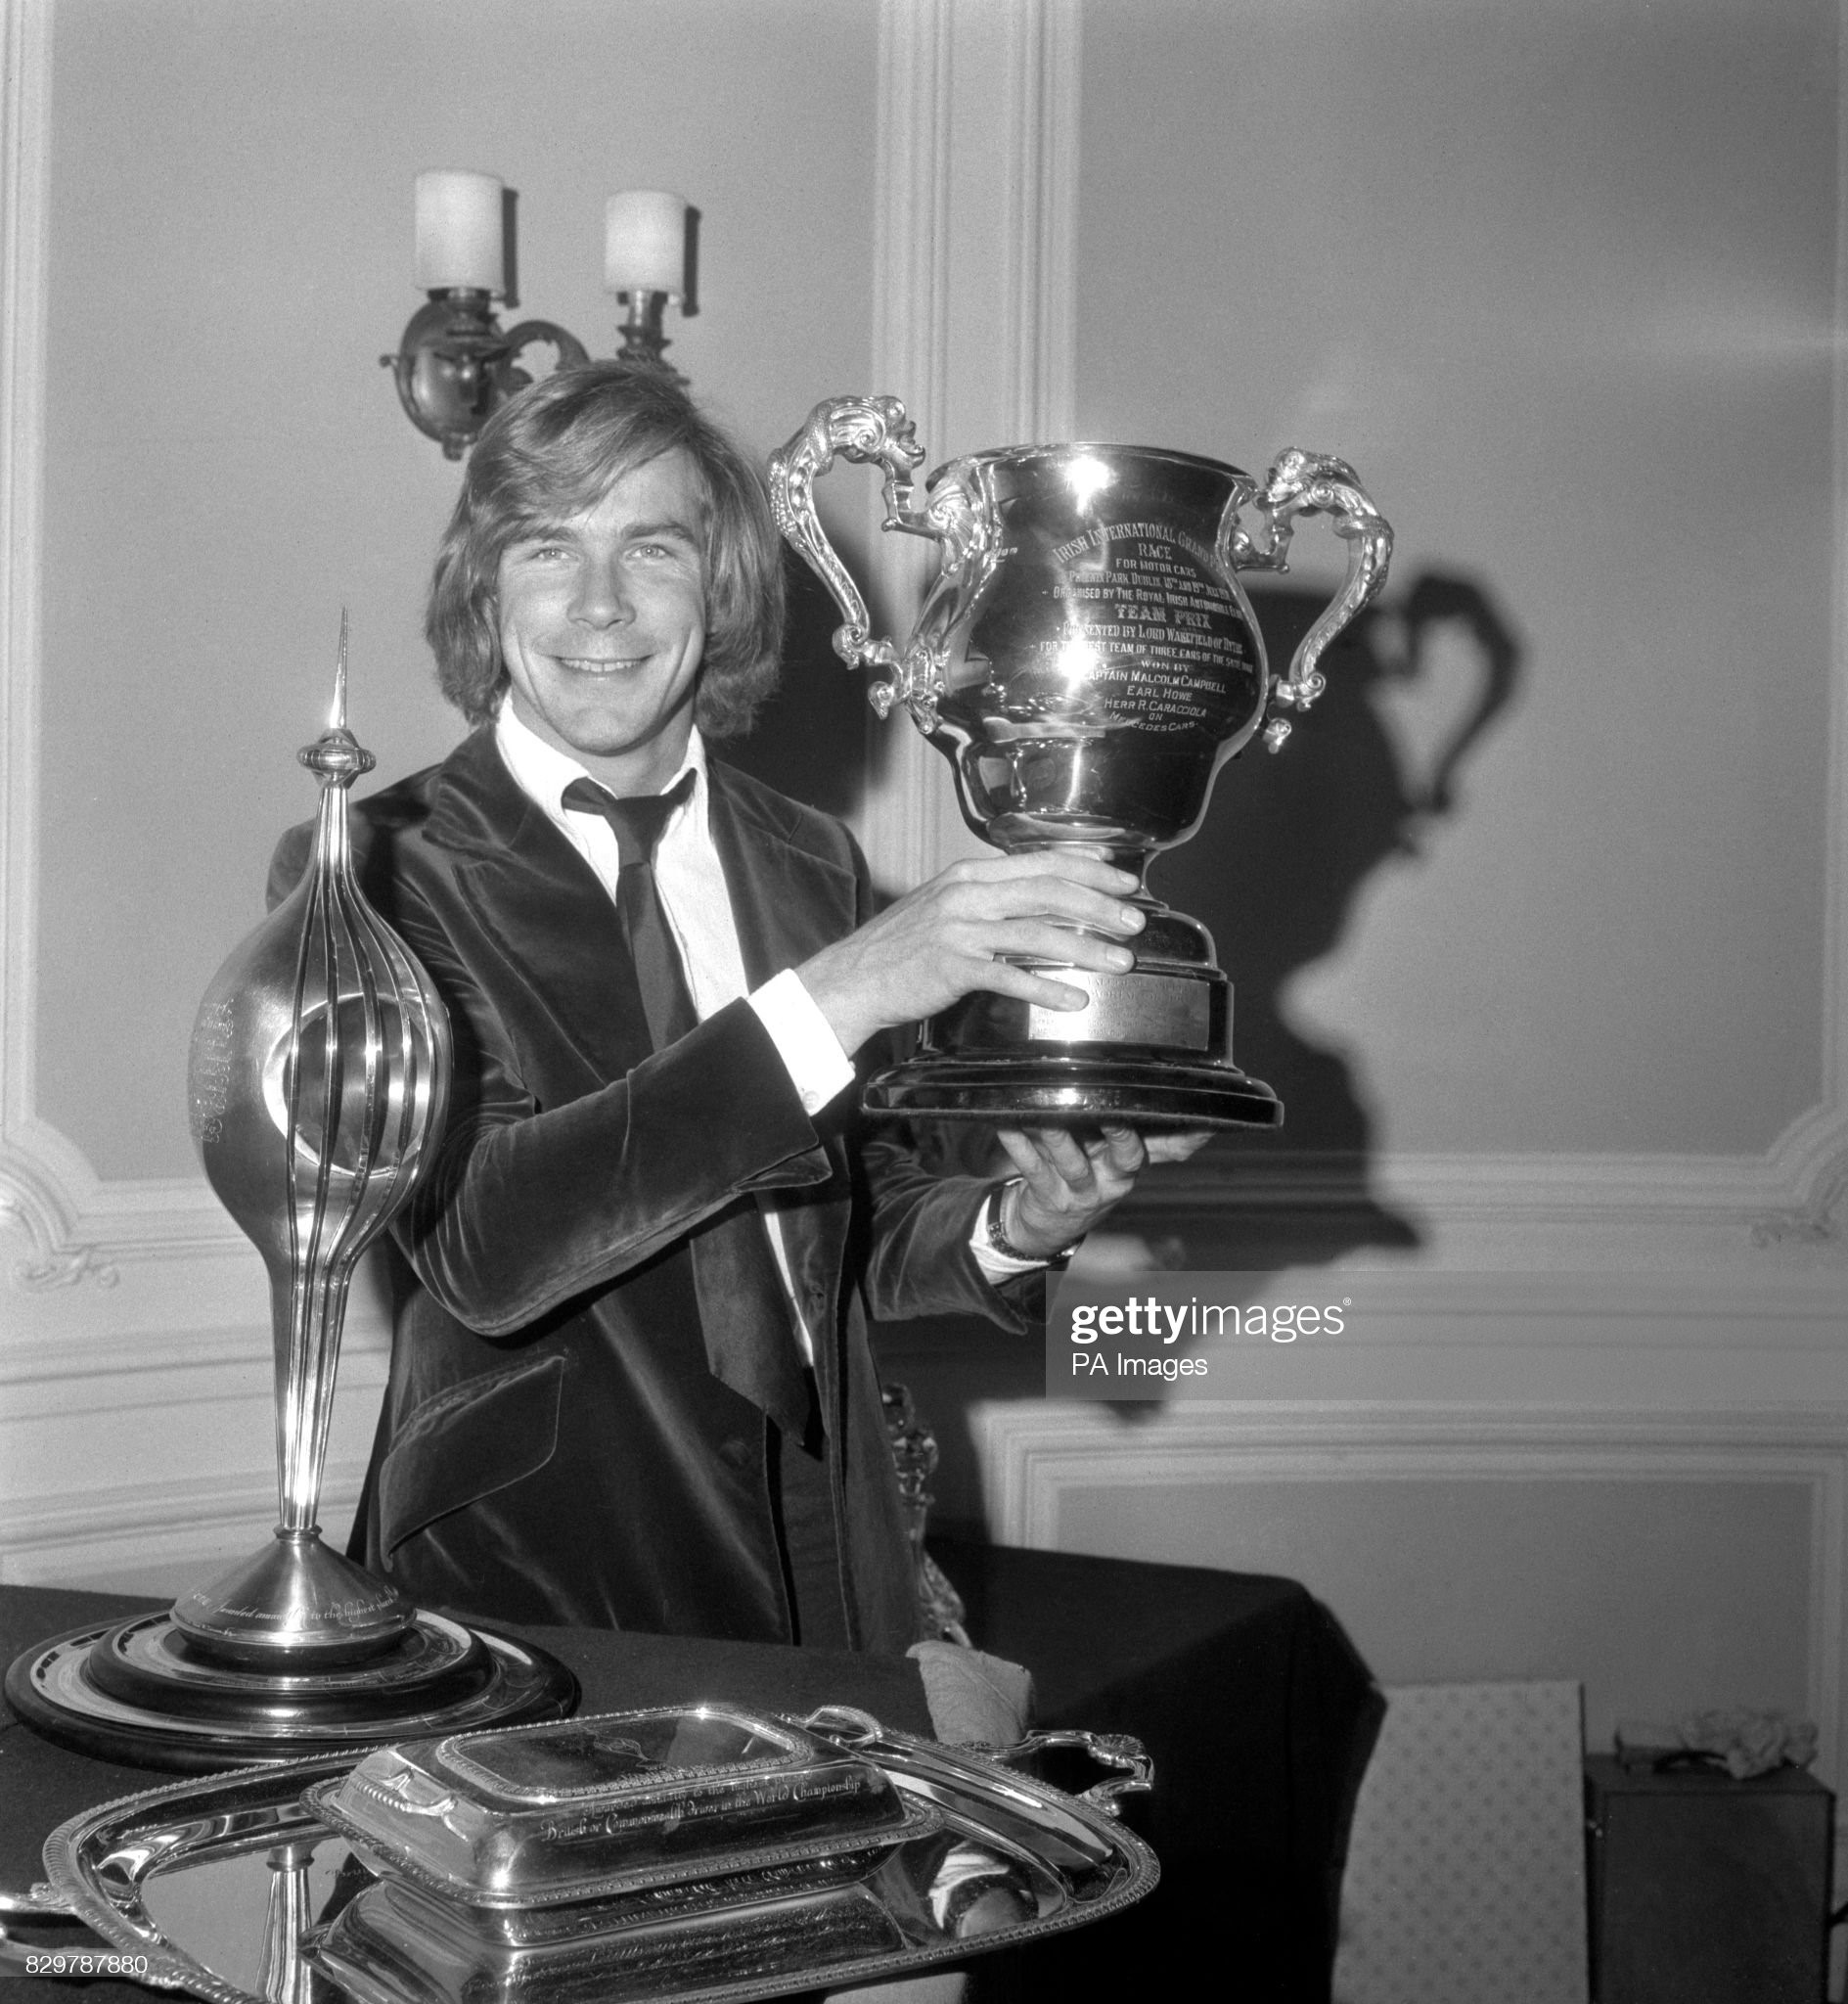 World Champion James Hunt on 03 December 1976 with trophies presented to him at the RAC headquarters in Pall Mall, where he also received a specially struck Rac gold medal as the first English driver to win the World title since Graham Hill in 1968. 